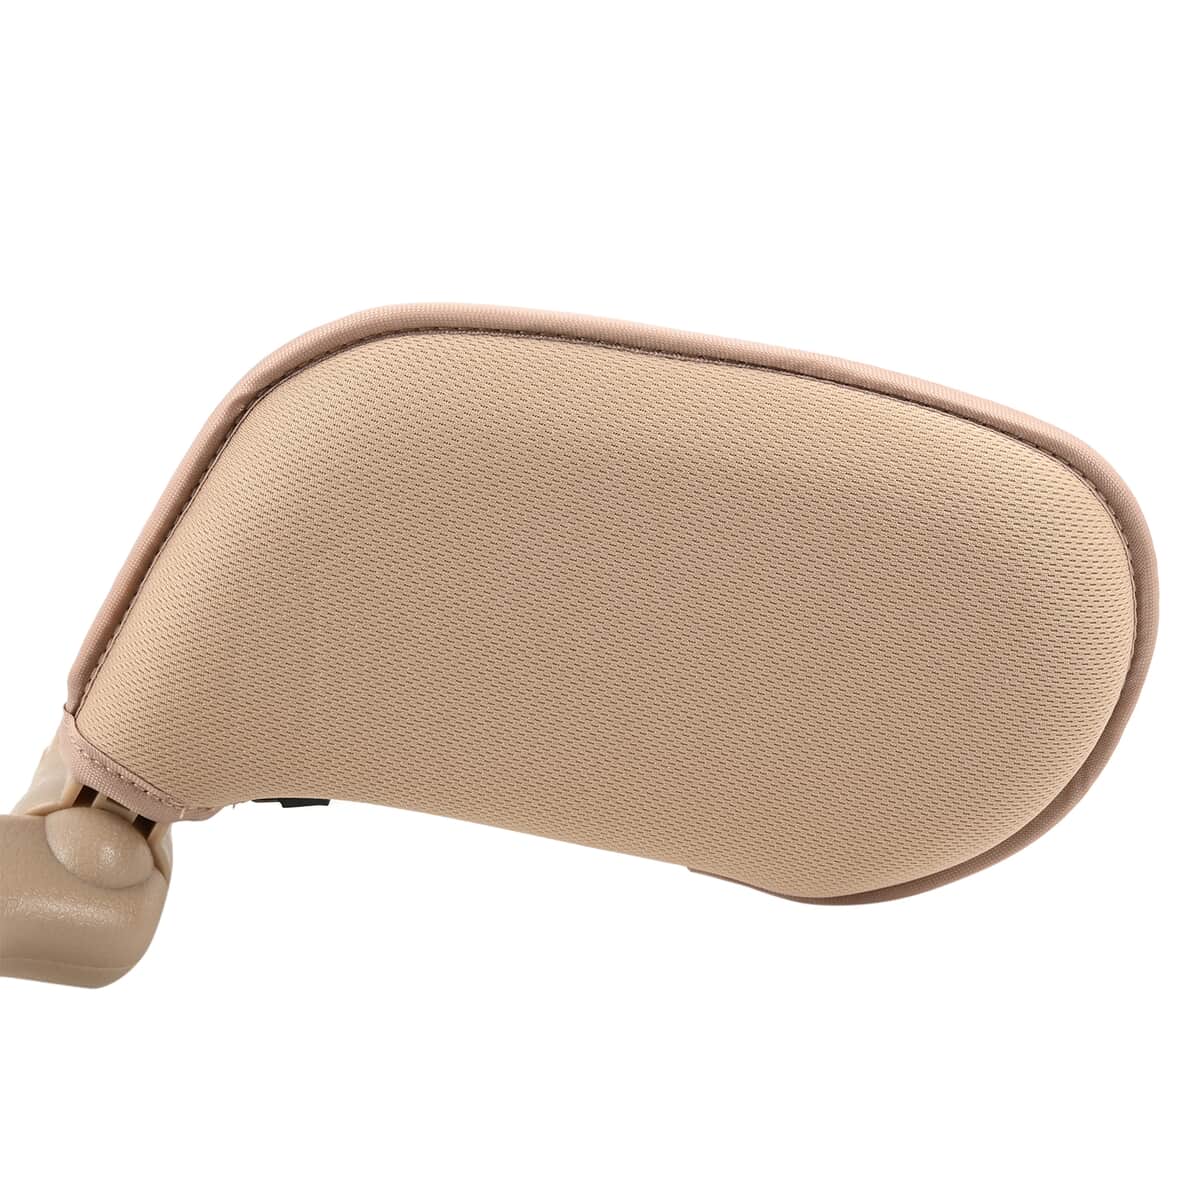 Beige Sweat-resistant Car Sleeping Head rest with Side Wings, 180 Degree Adjustable Neck Rest Pillow, Soft Memory Foam, Mountable on Car Seat image number 6